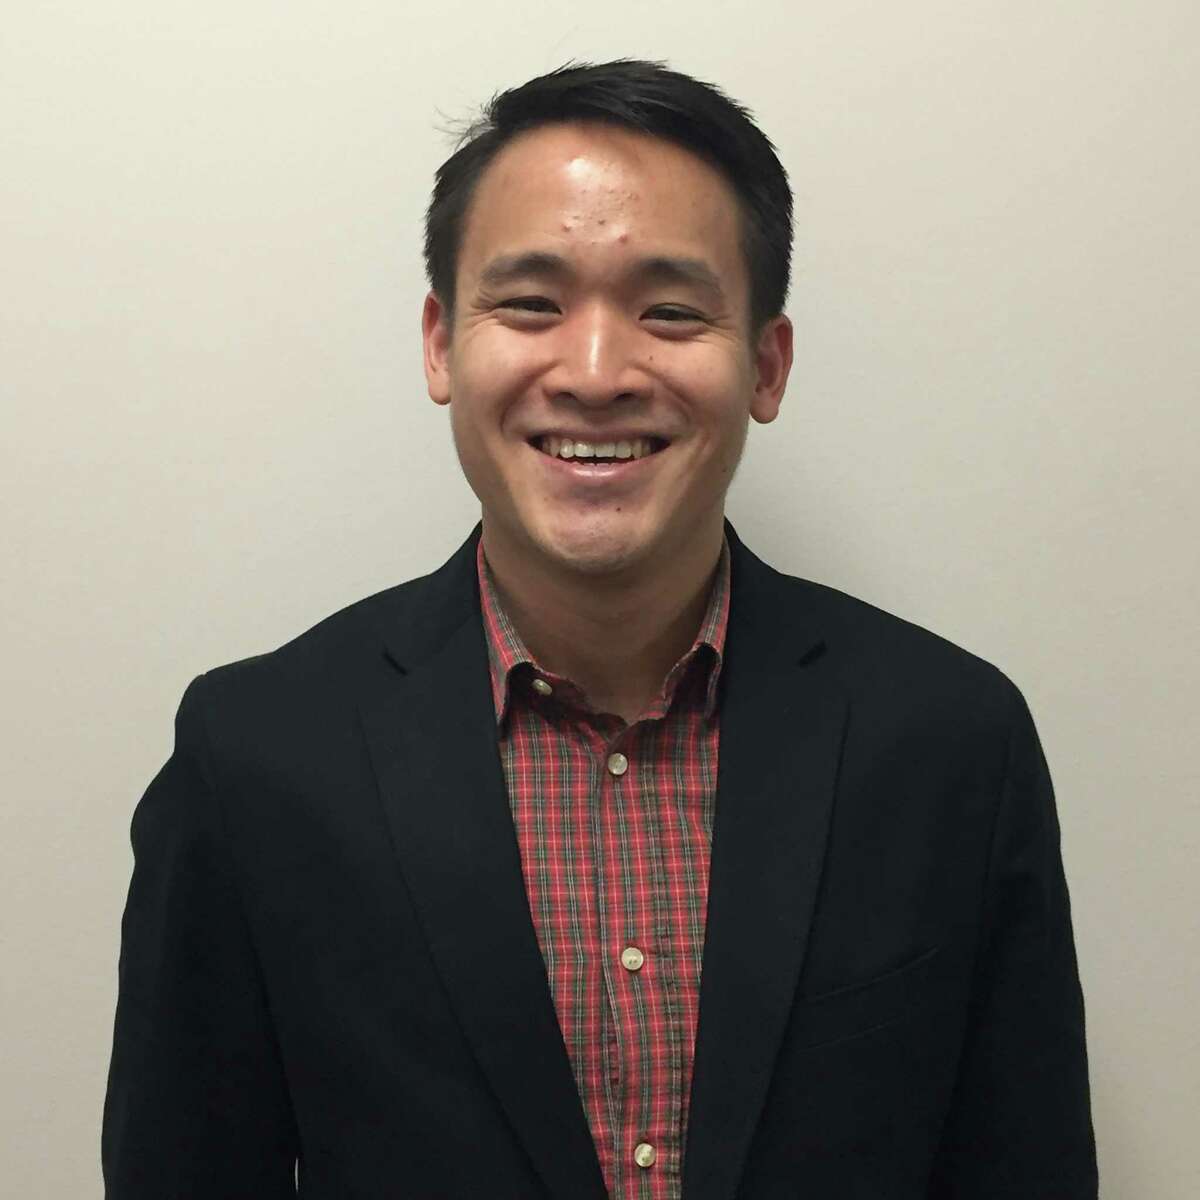 The Health Museum has named Hao Nguyen as director of operations.